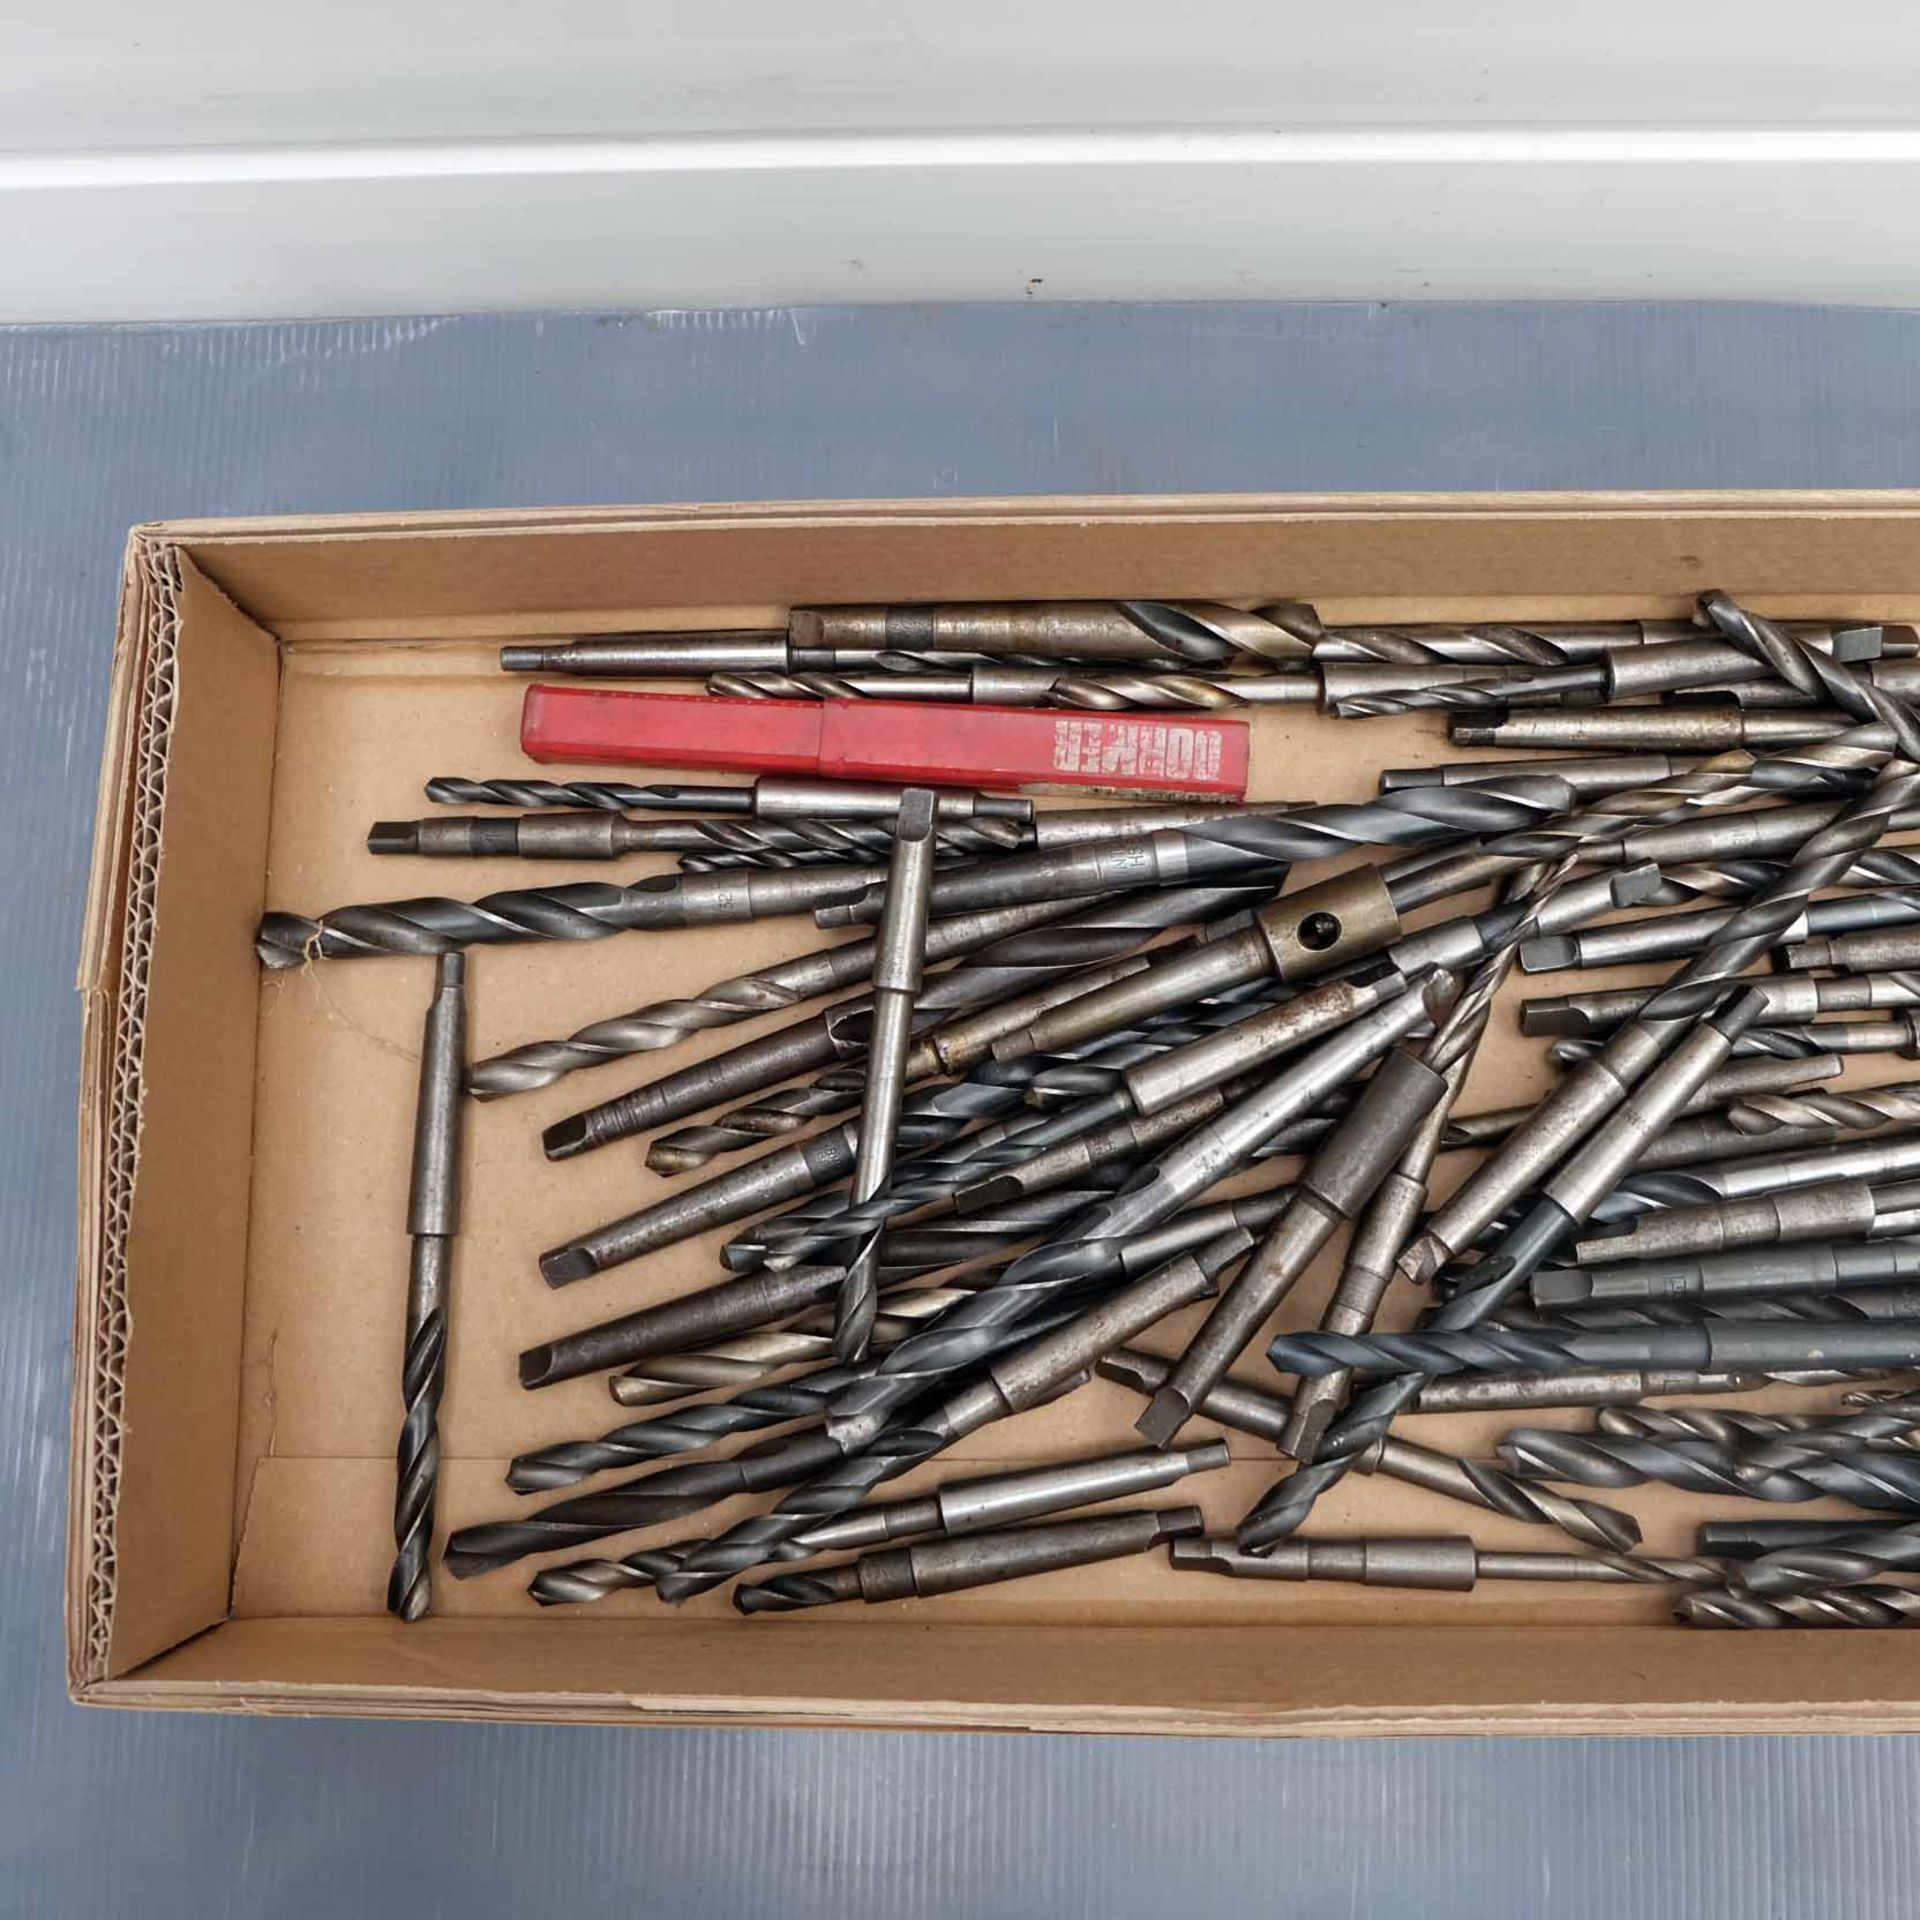 Quantity of 1 Morse Taper Twist Drills. Various Sizes. - Image 2 of 3